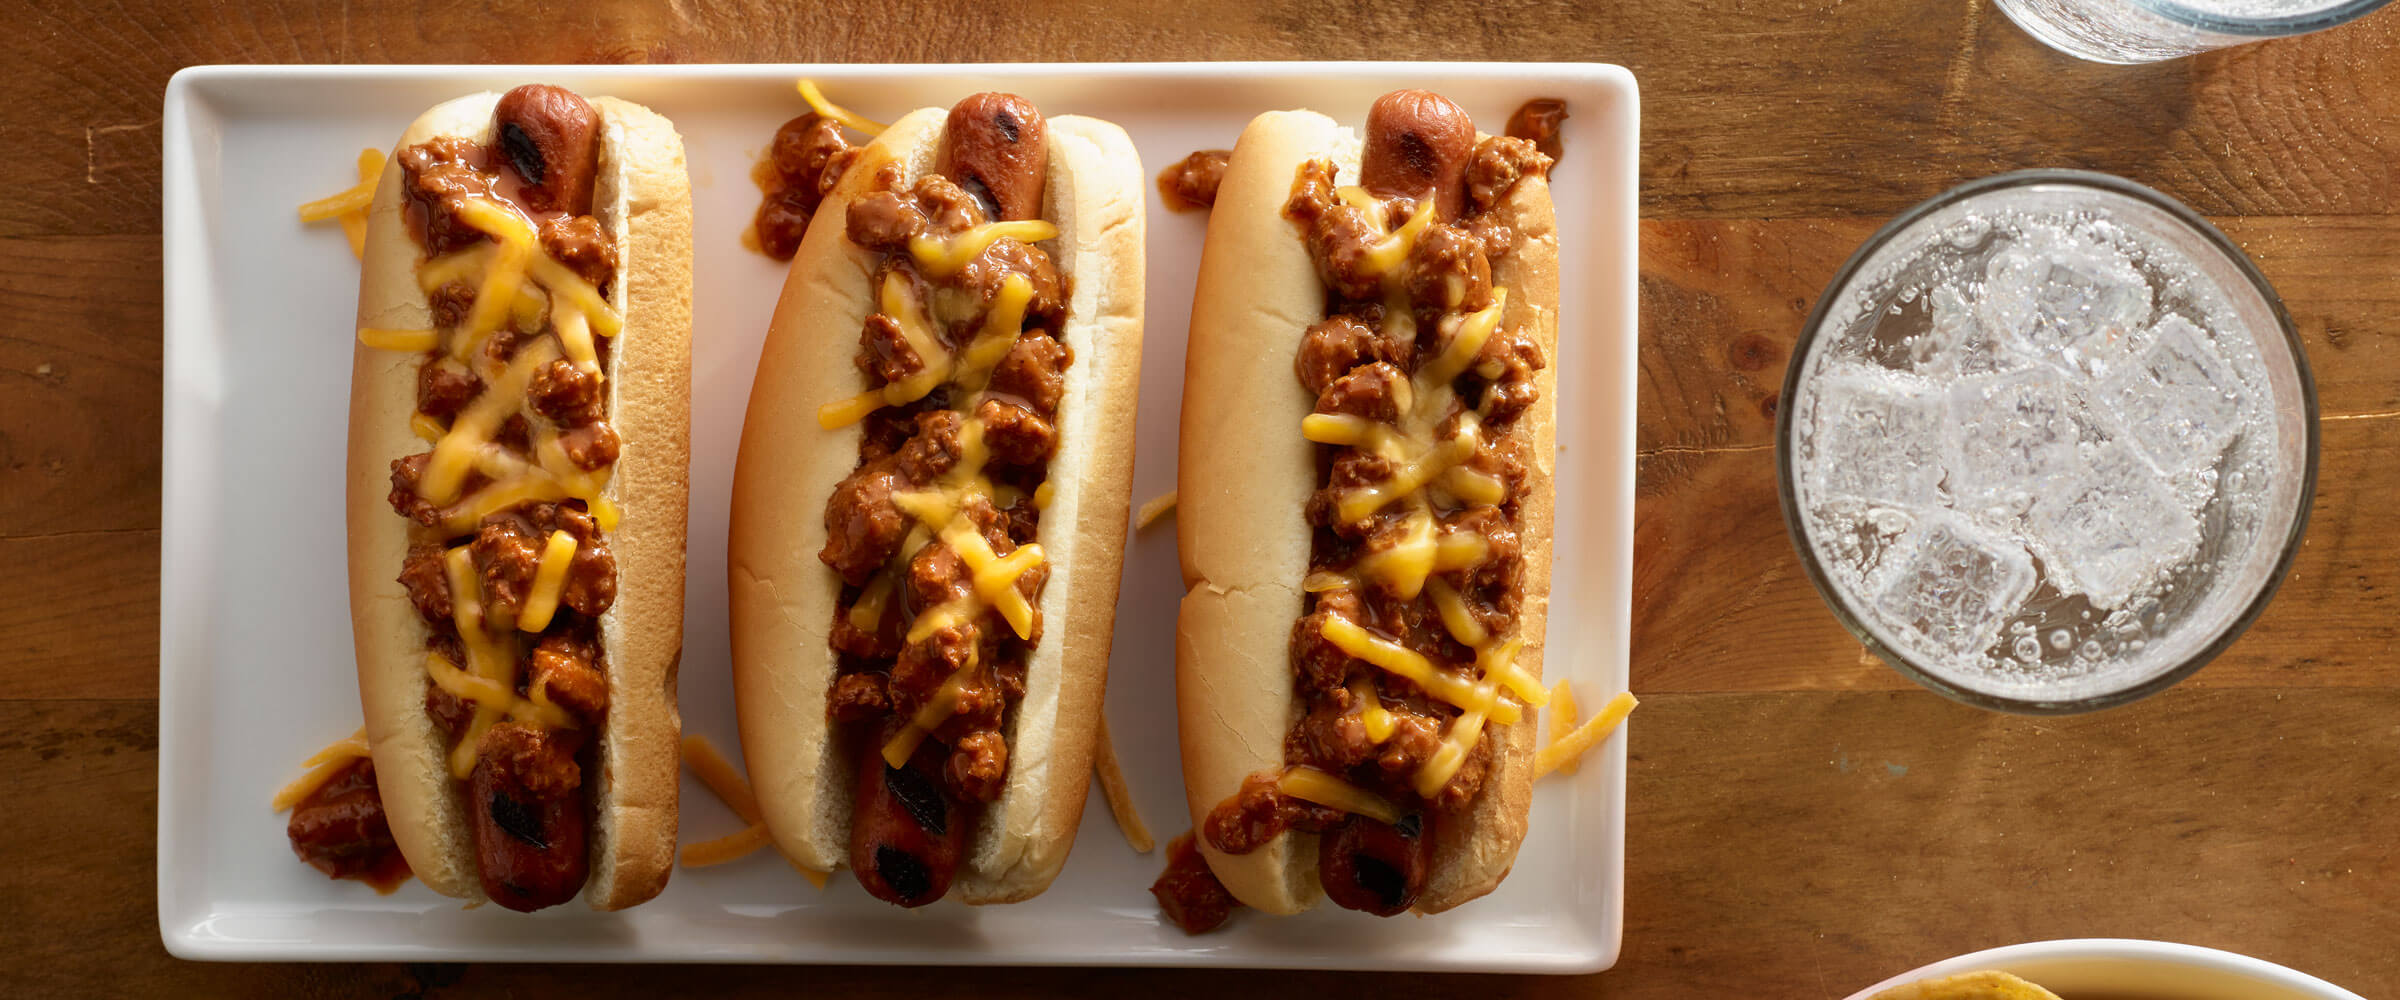 Chili Dogs topped with Cheese on white platter with drink on the side